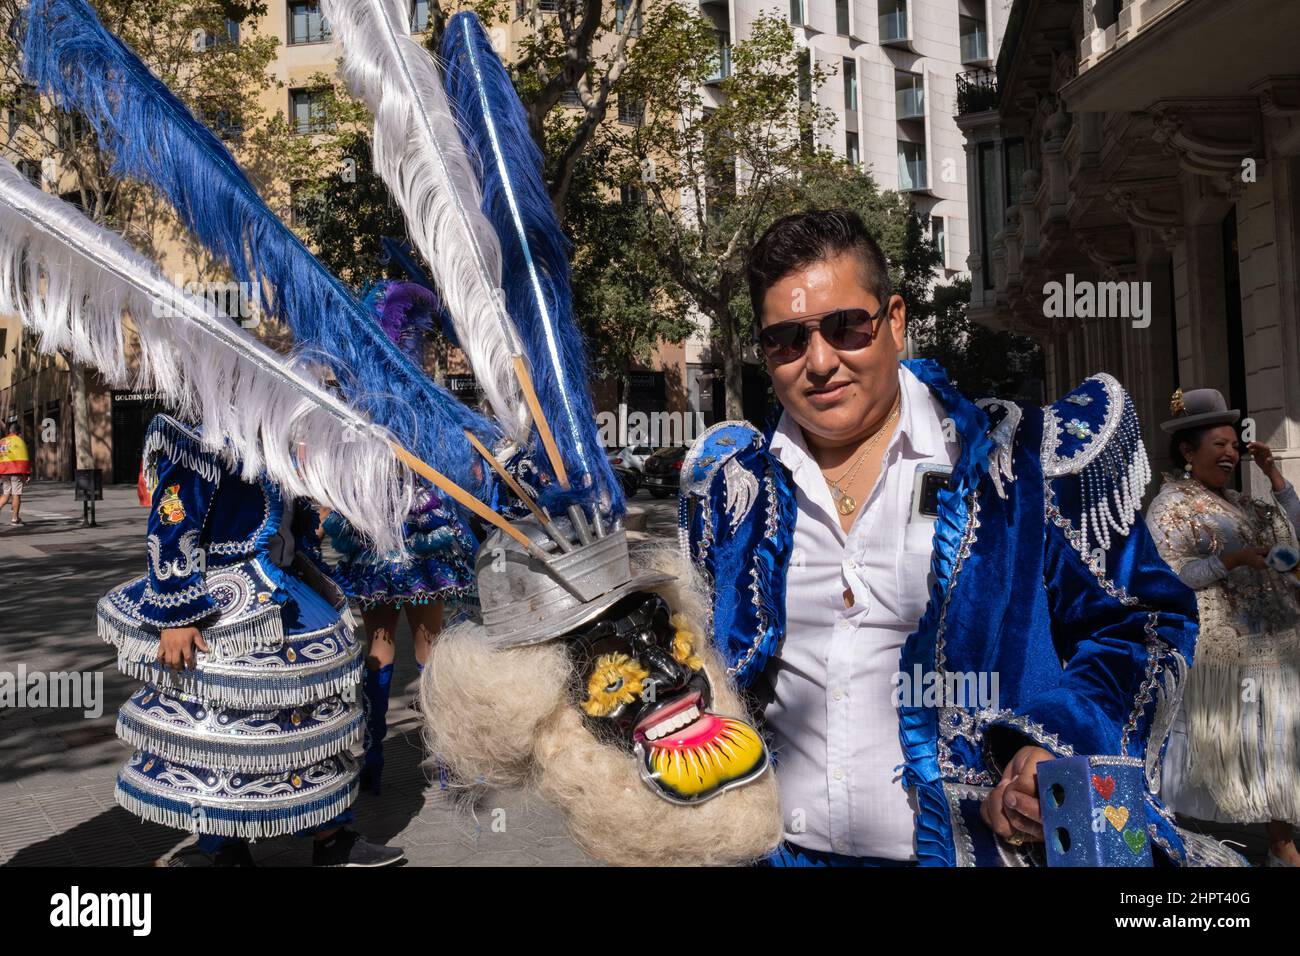 A guy in Bolivian traditional blue dress during Dia de la Hispanidad (Hispanic Day) a national public holiday in Spain. Gracia Avenue in Barcelona. Stock Photo